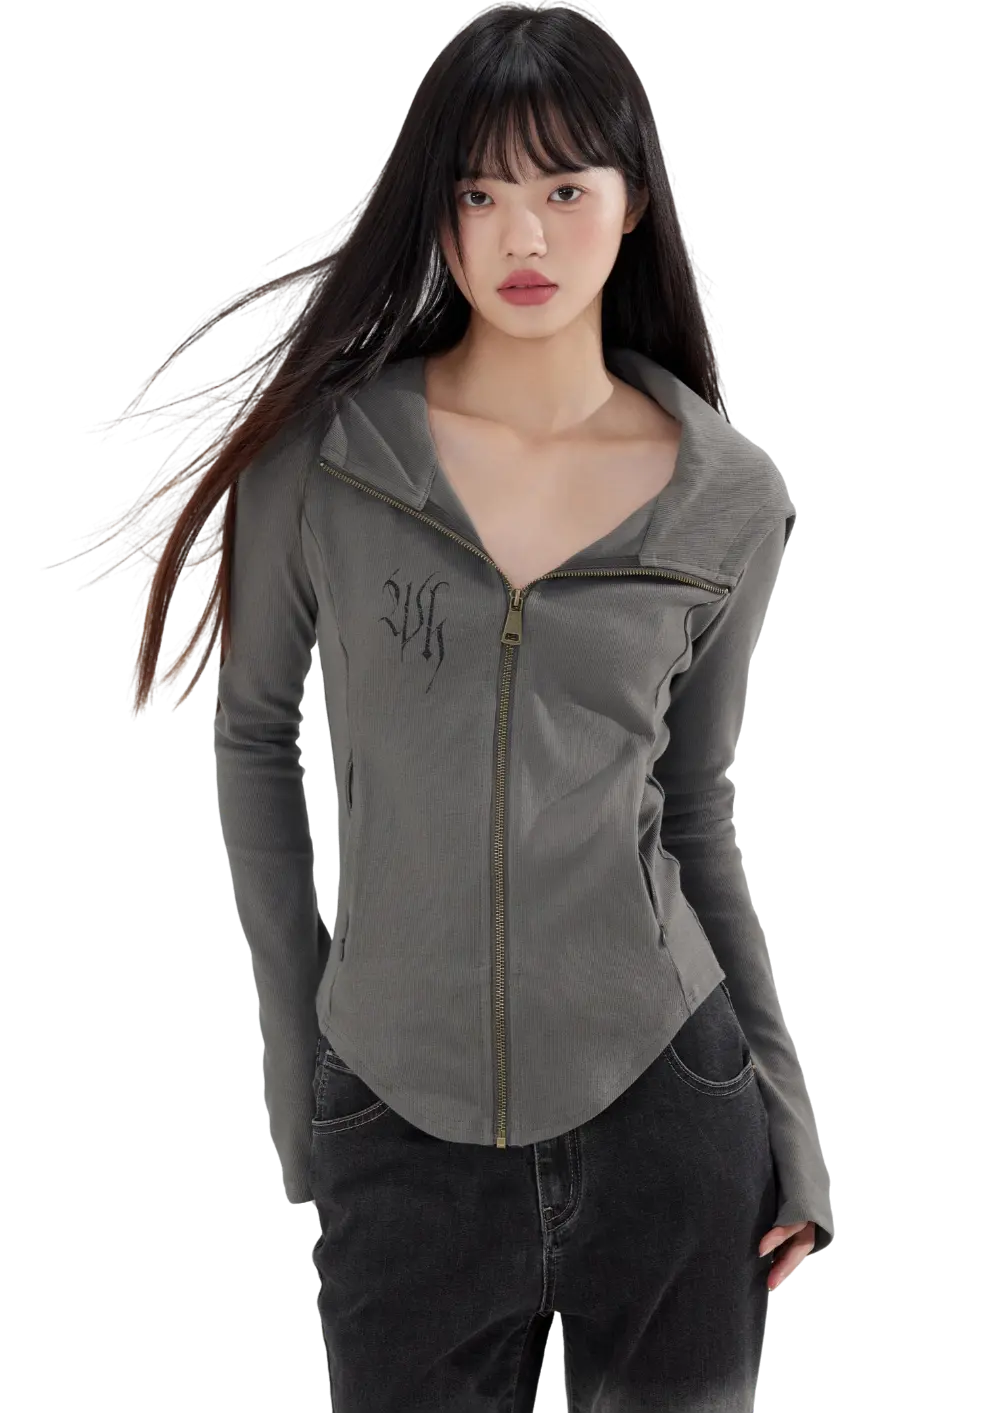 Retro Casual Sports Waisted Hooded Top - PSYLOS 1, Retro Casual Sports Waisted Hooded Top, Hoodie, WooHa, PSYLOS 1